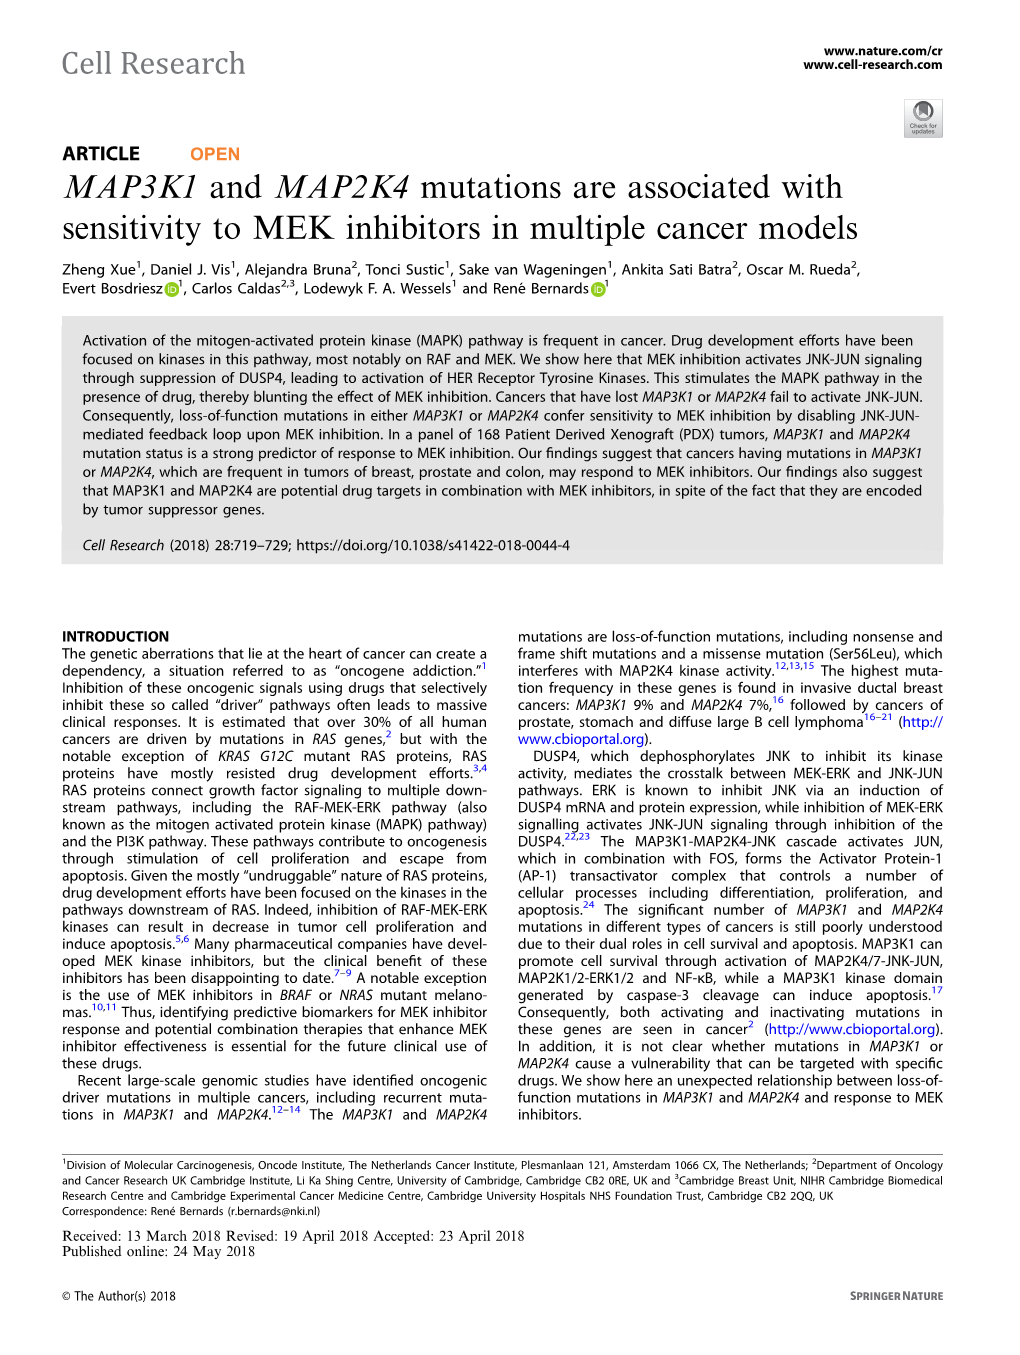 MAP3K1 and MAP2K4 Mutations Are Associated with Sensitivity to MEK Inhibitors in Multiple Cancer Models